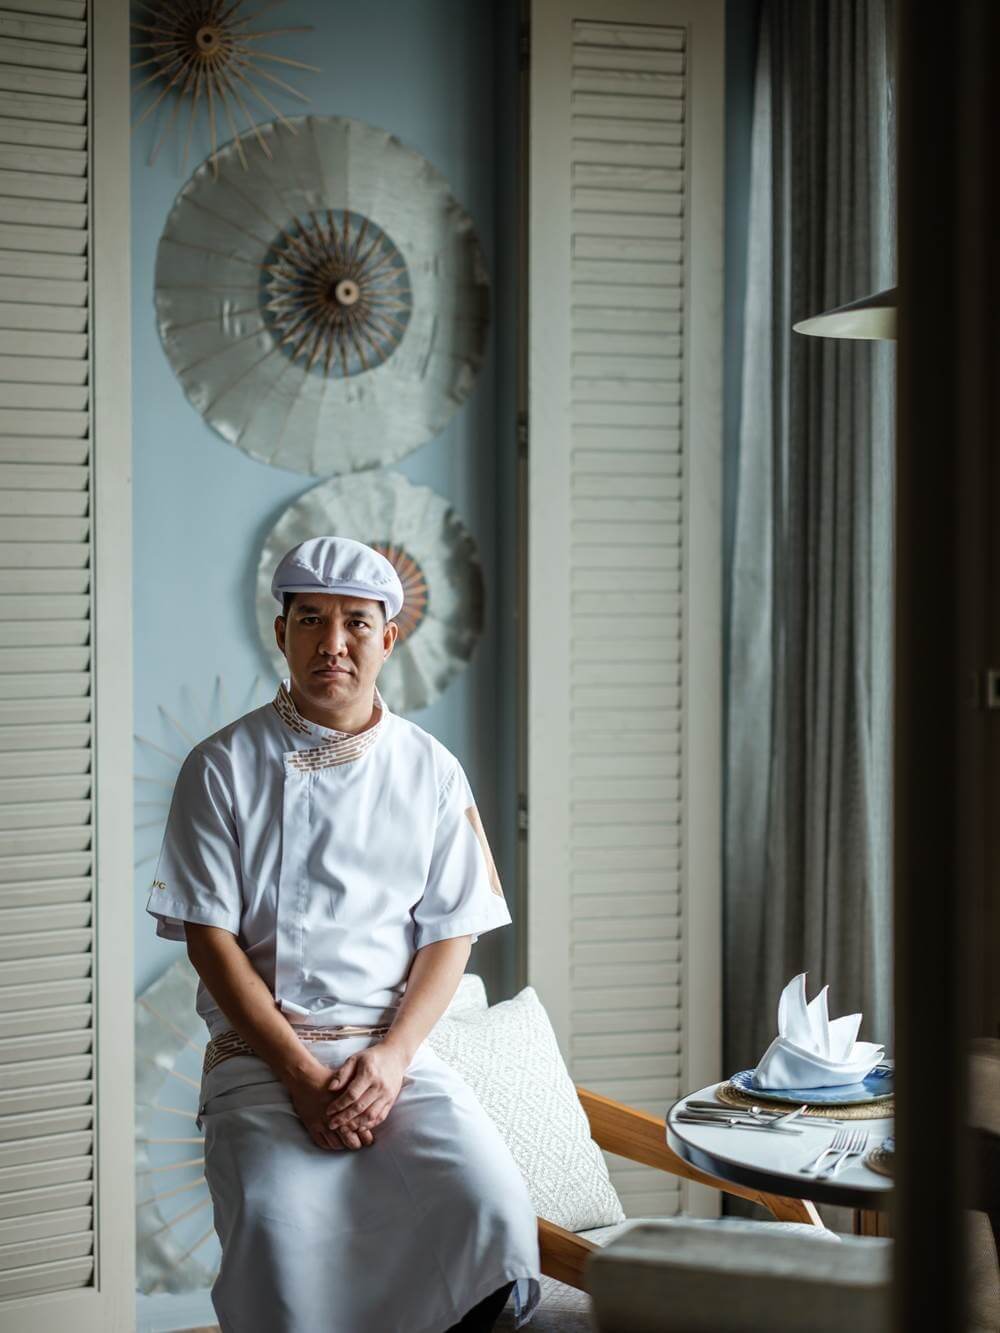 As part of the urban hotel’s 360° Cuisine concept, executive chef Suksant Chutinthratip (Billy) and Mai Restaurant & Bar’s sous chef Karn Phojun (pictured) have crafted dishes, featuring produce from the urban hotel’s nearby organic farm, that use as much of every ingredient as possible.